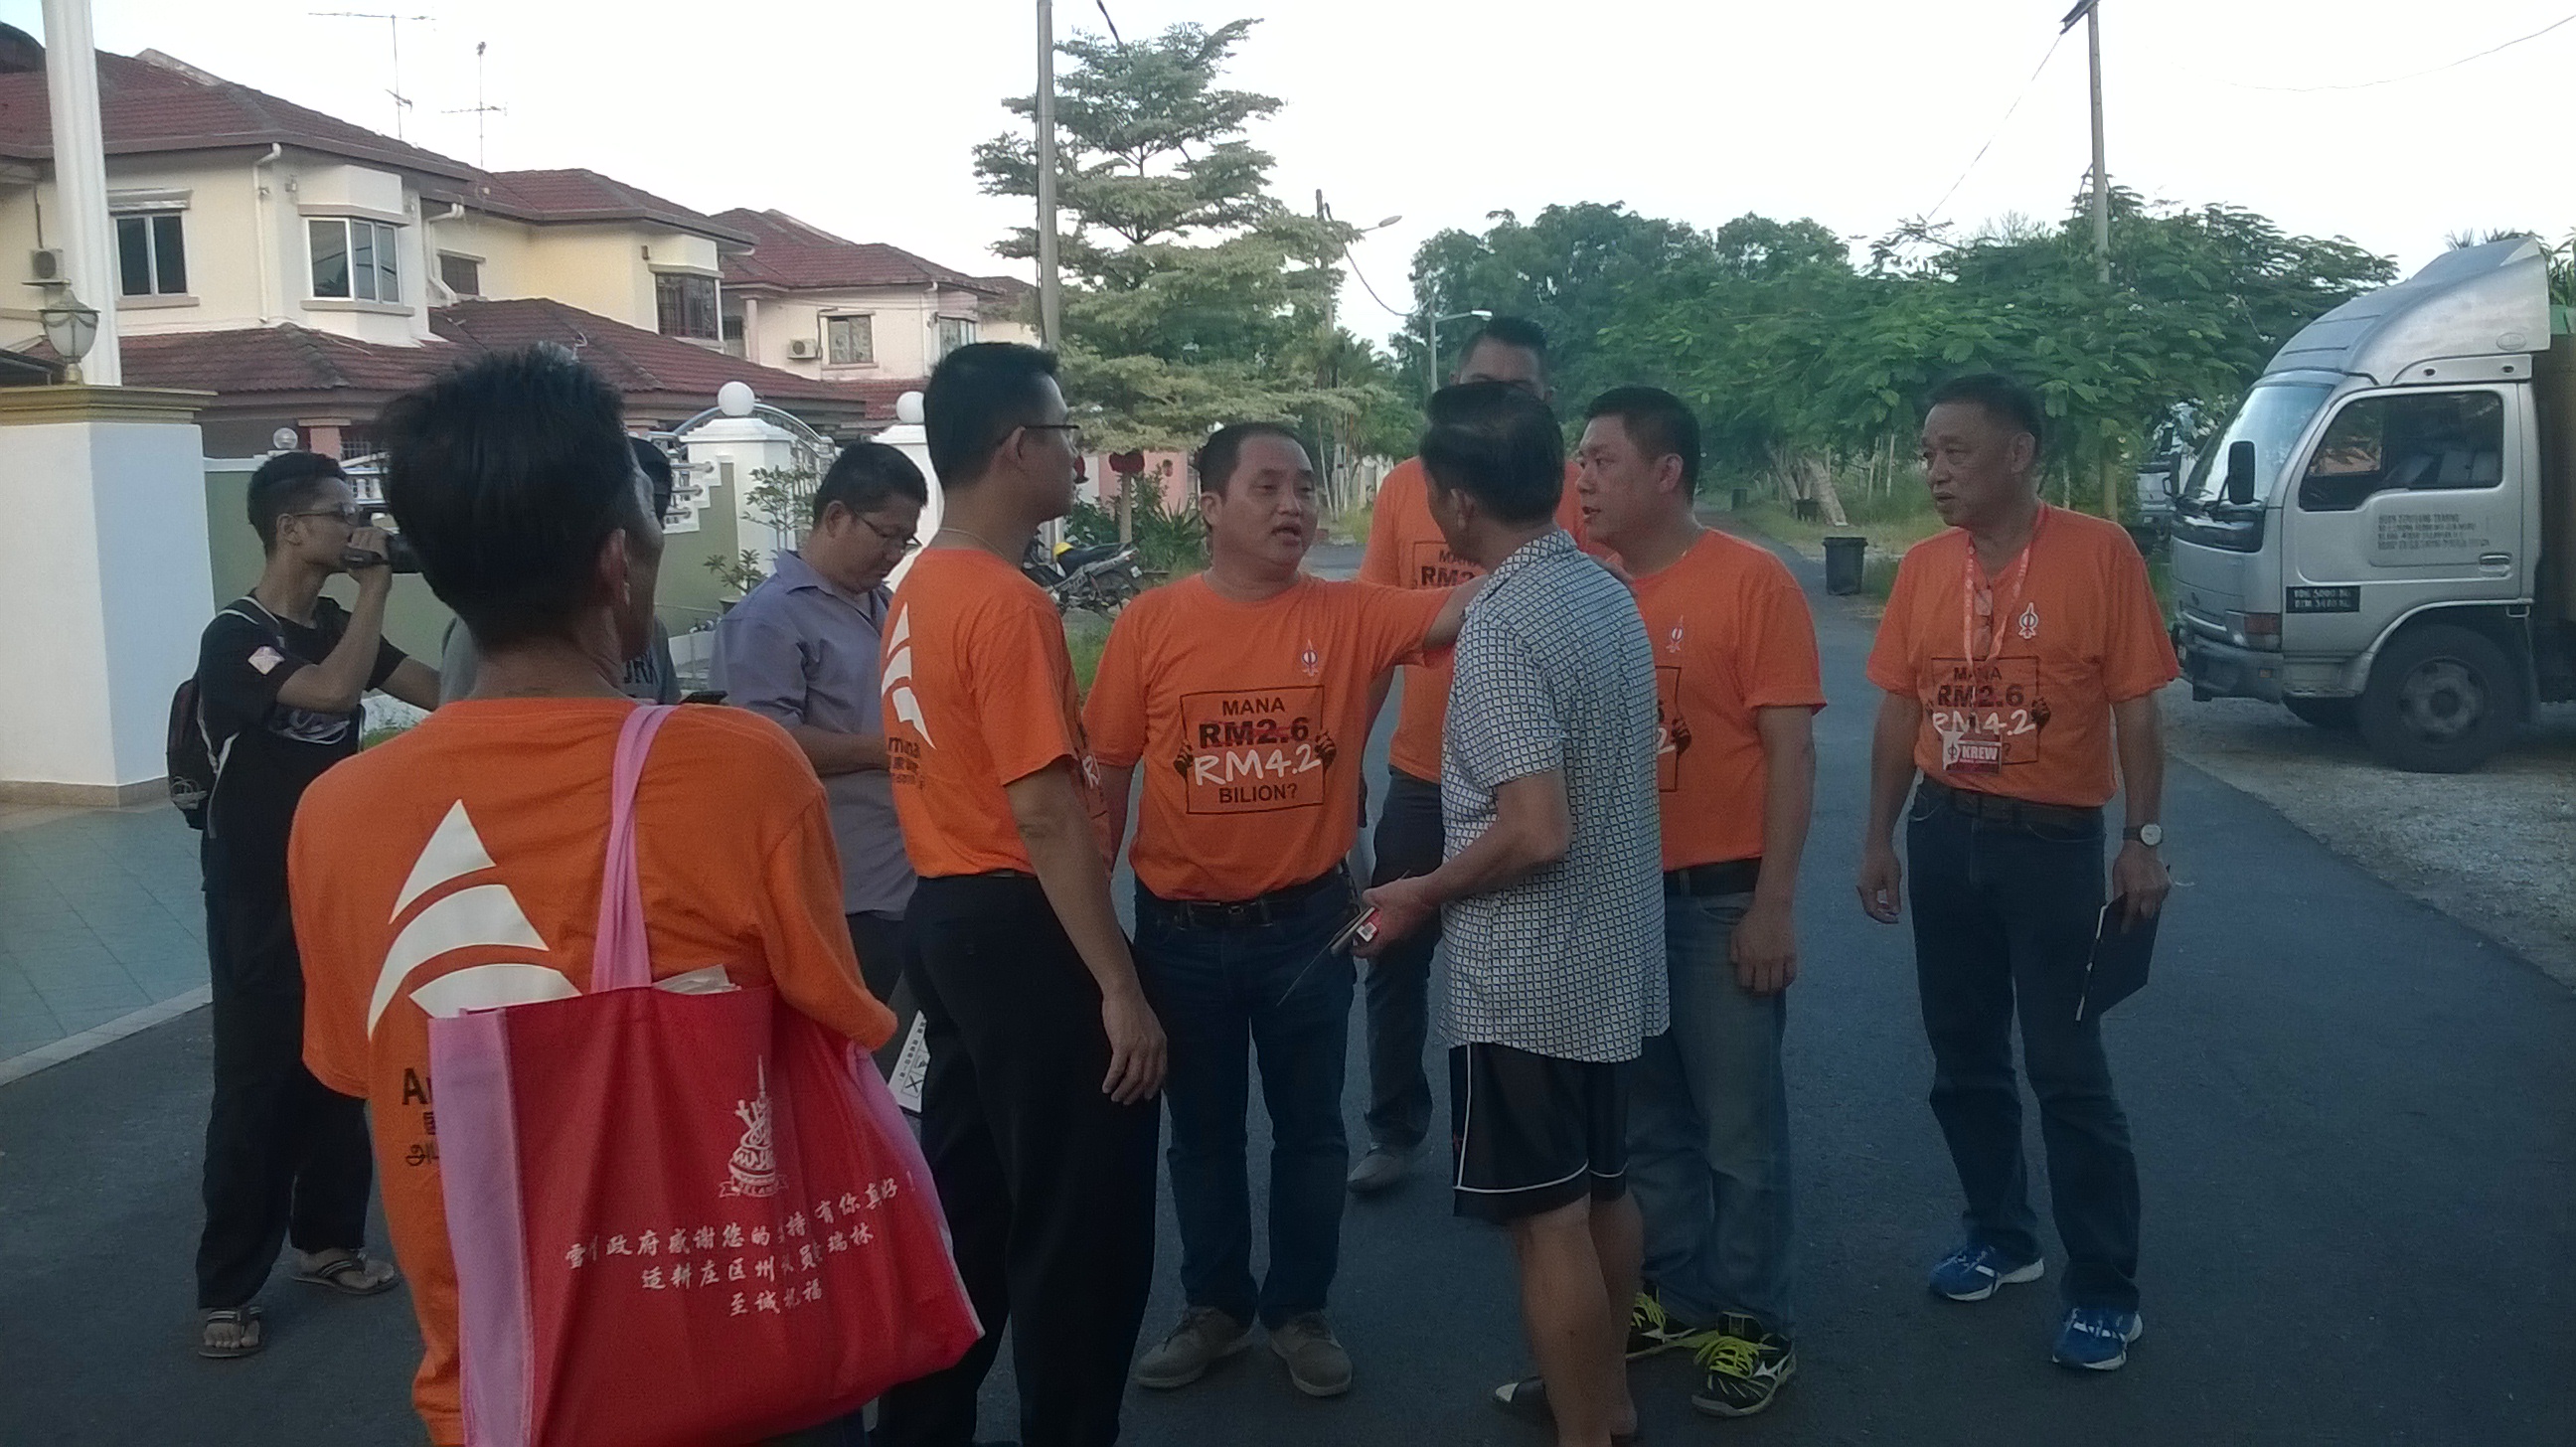 YB Ng Suee Lim did his part in promoting the Amanah candidate to locals.